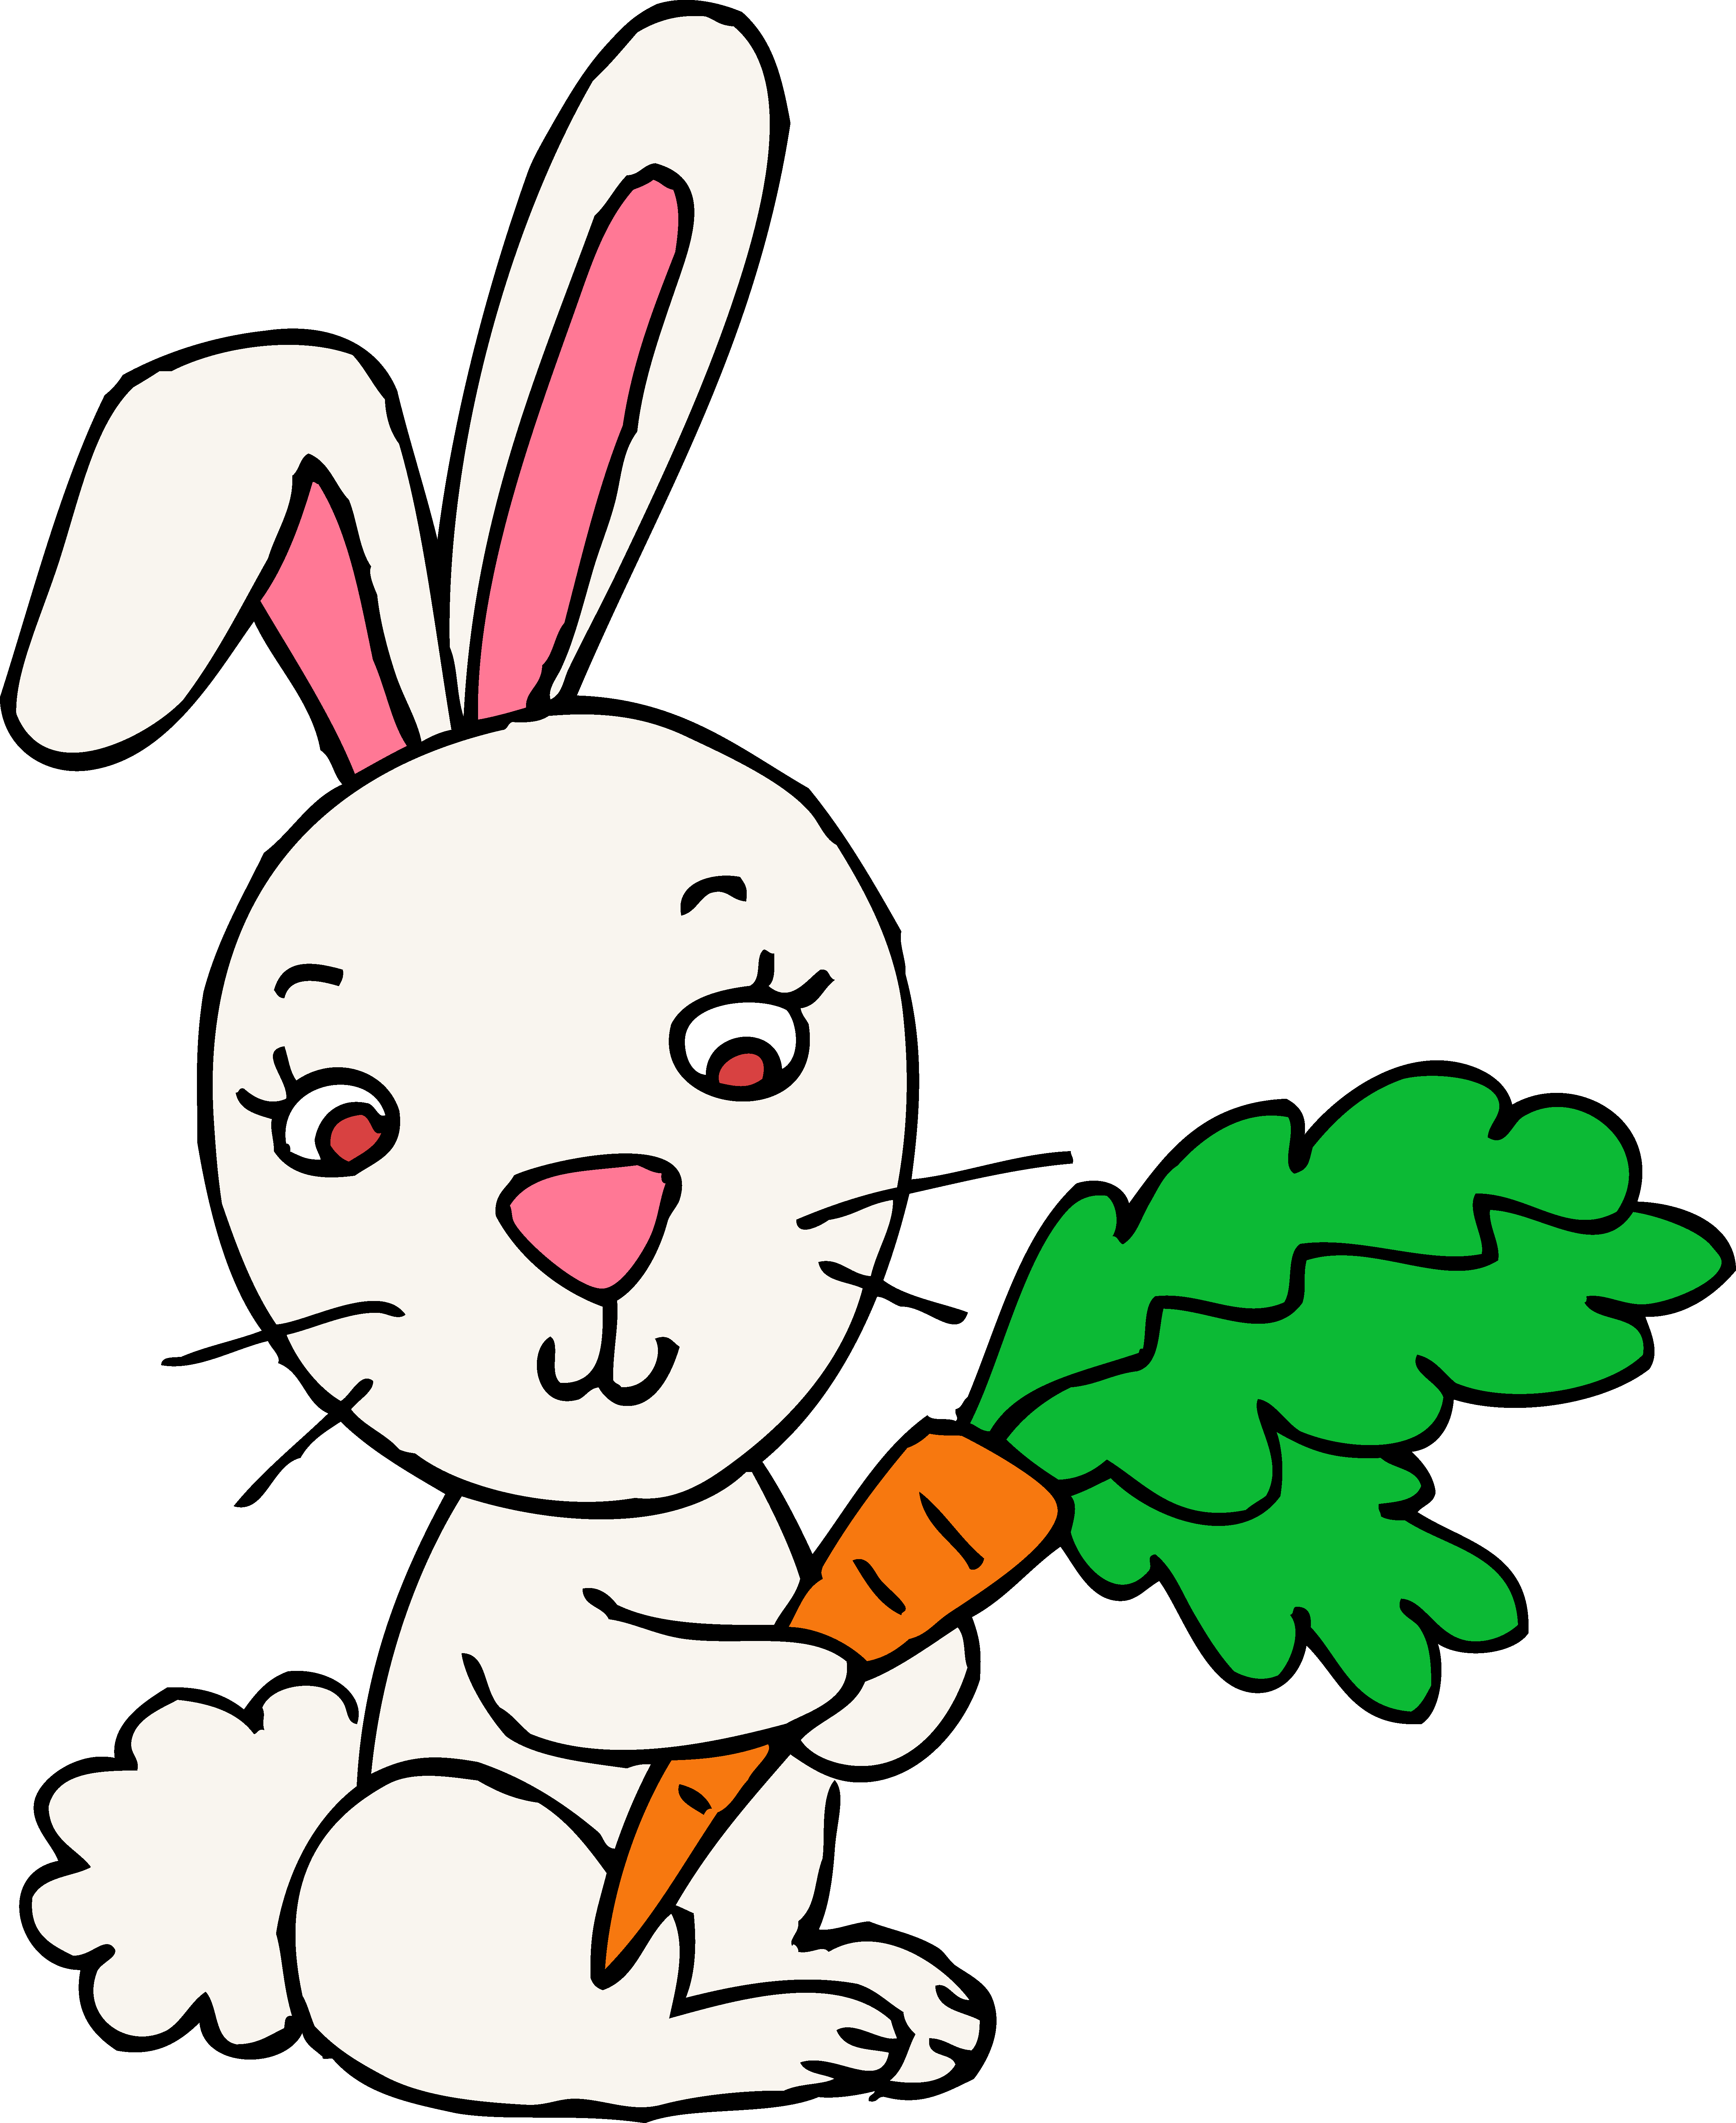 Free Rabbit Images Free, Download Free Rabbit Images Free png images